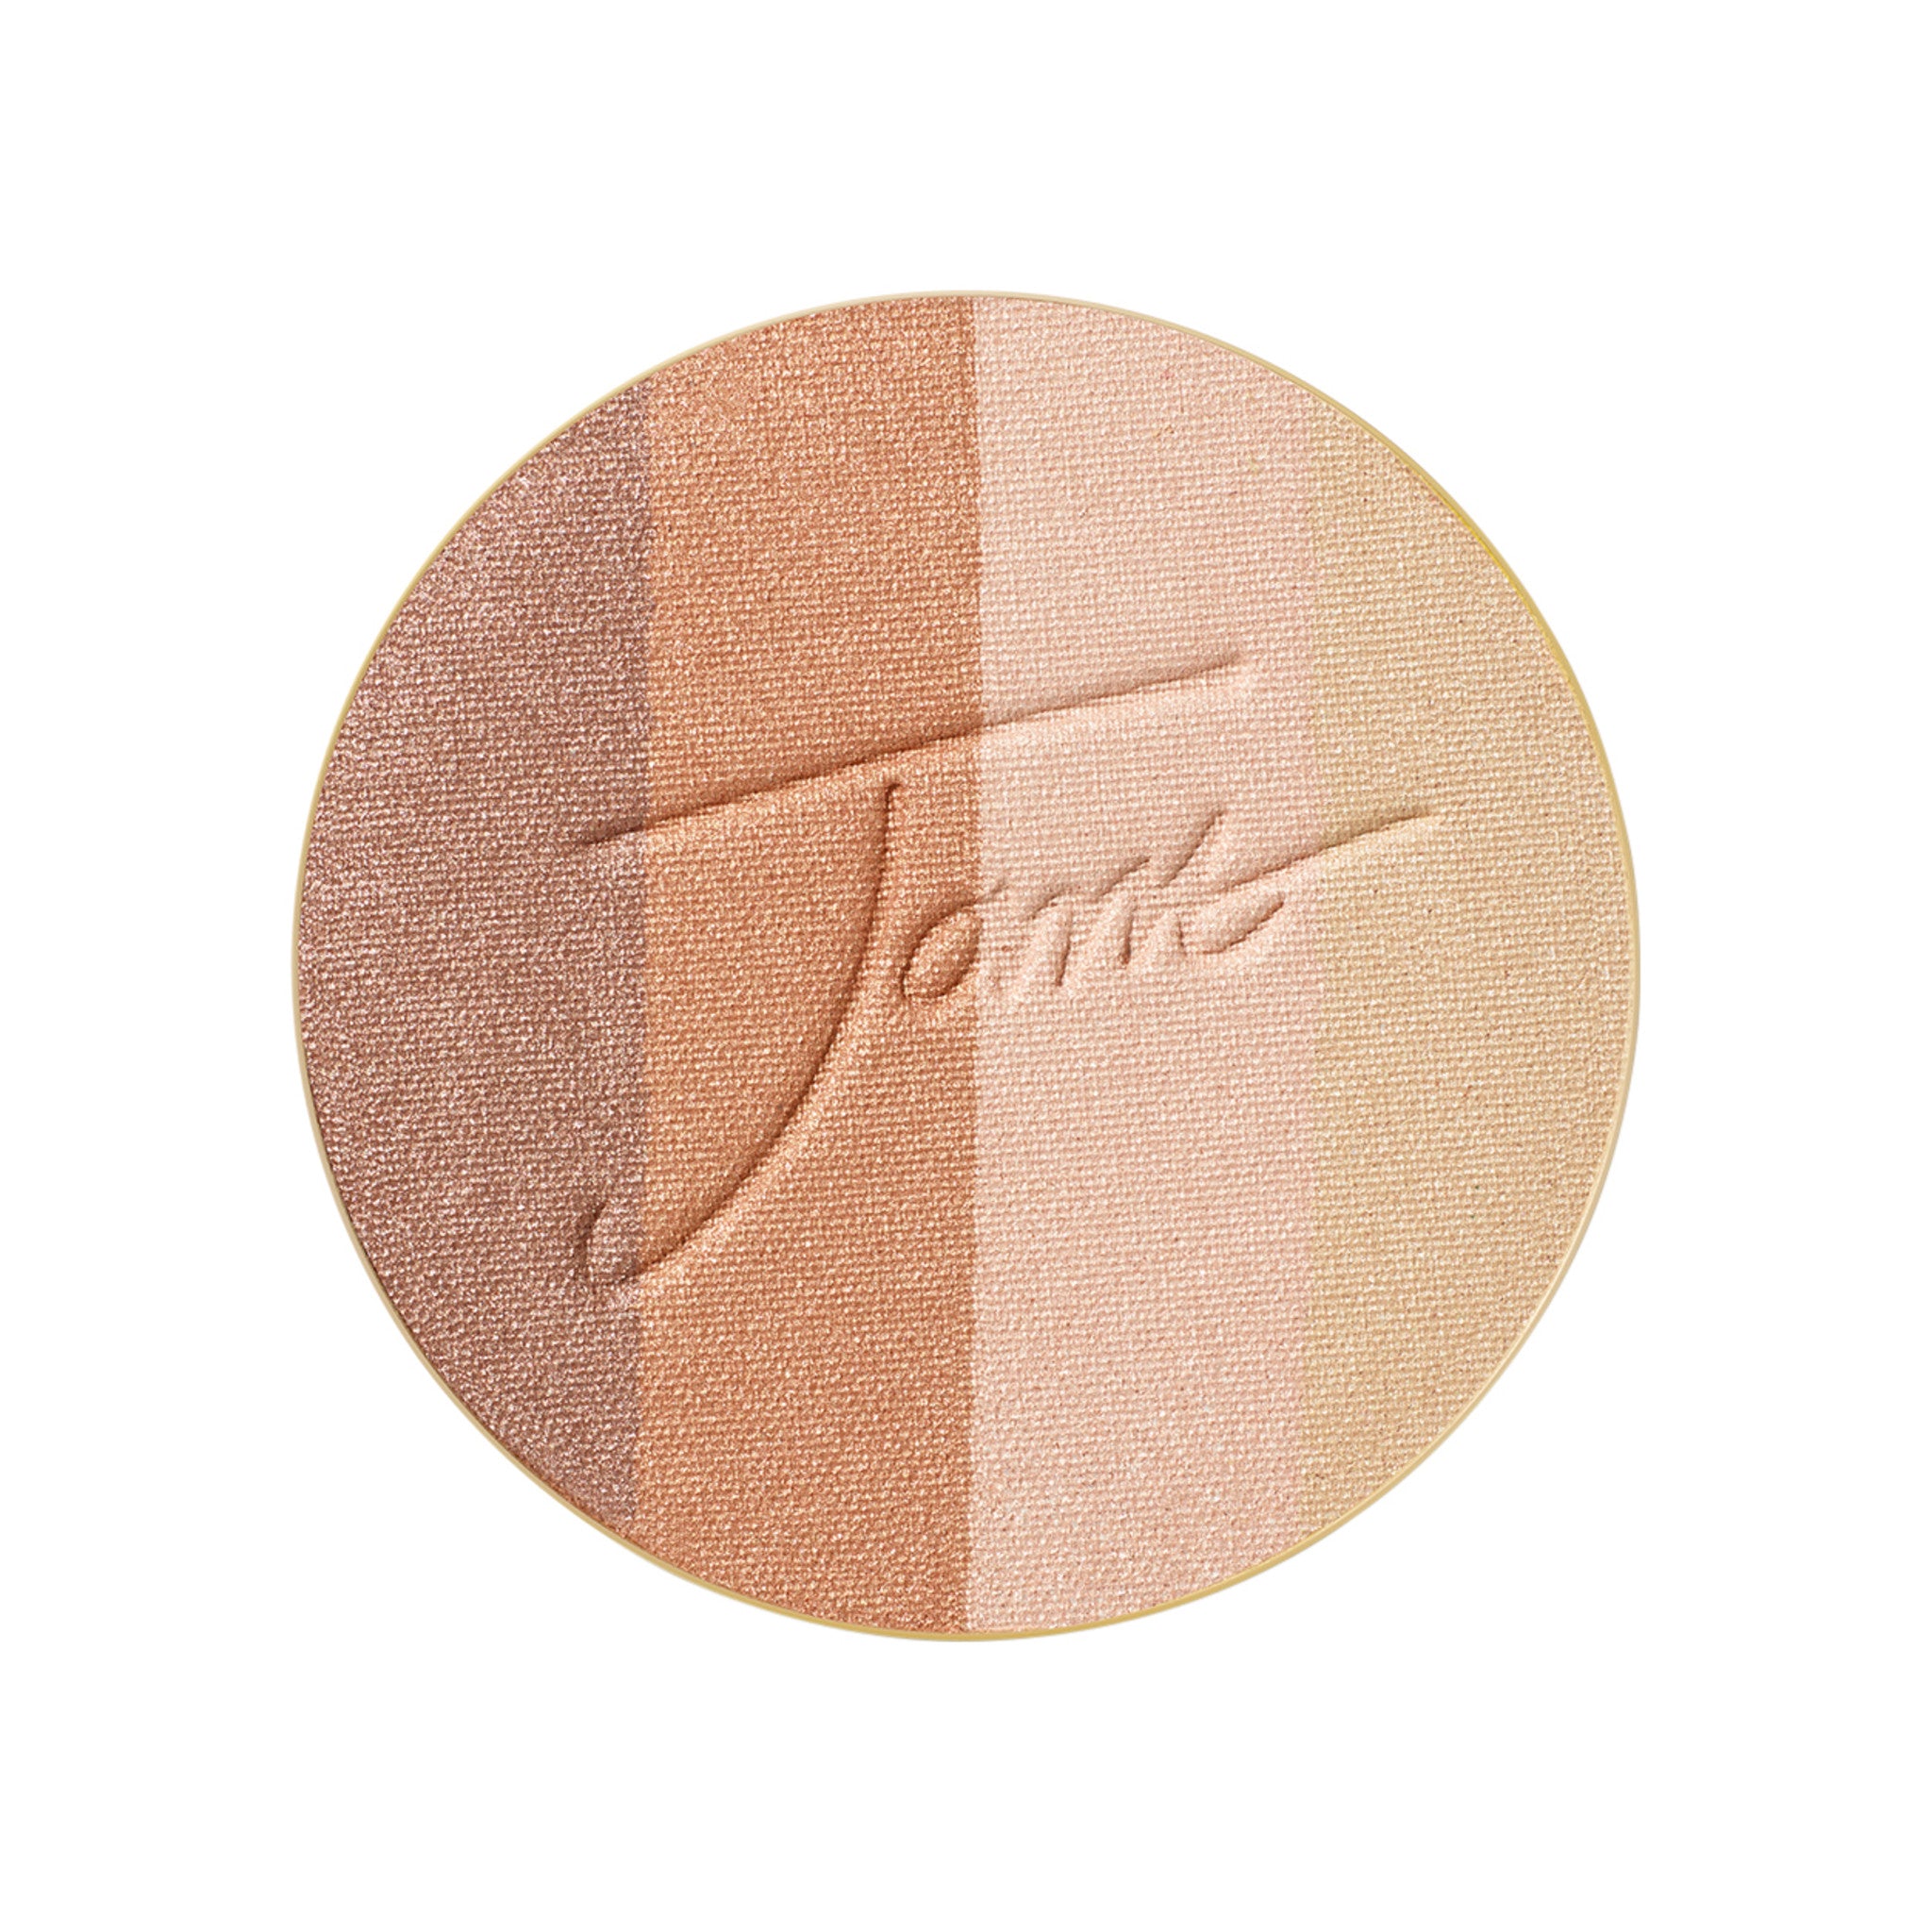 Jane Iredale PureBronze Shimmer Bronzer Refill Color/Shade variant: Moonglow main image.